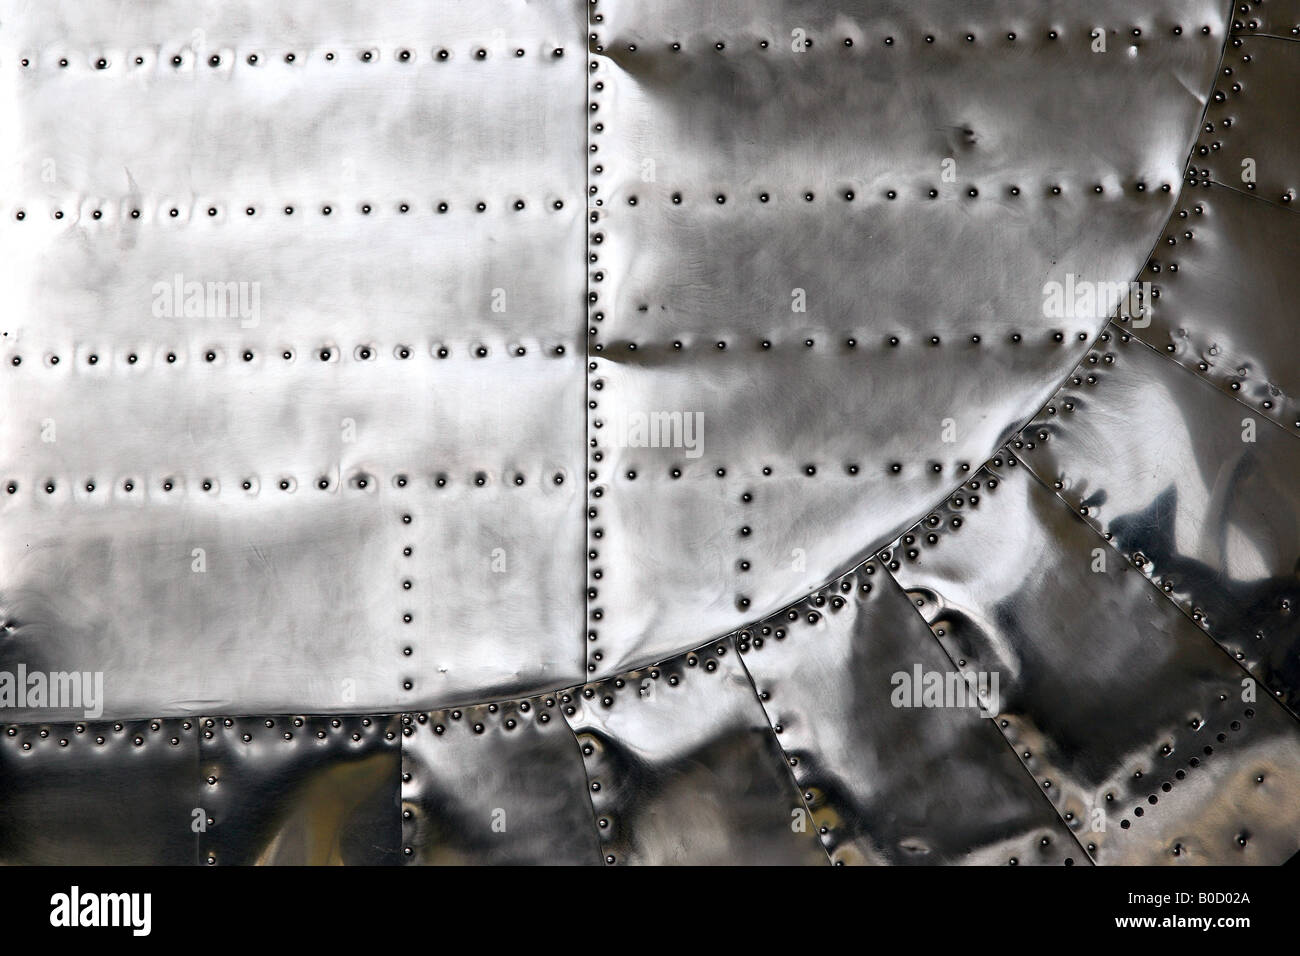 The stressed skin of a Liberator bomber at the Imperial War Museum at Duxford in England Stock Photo